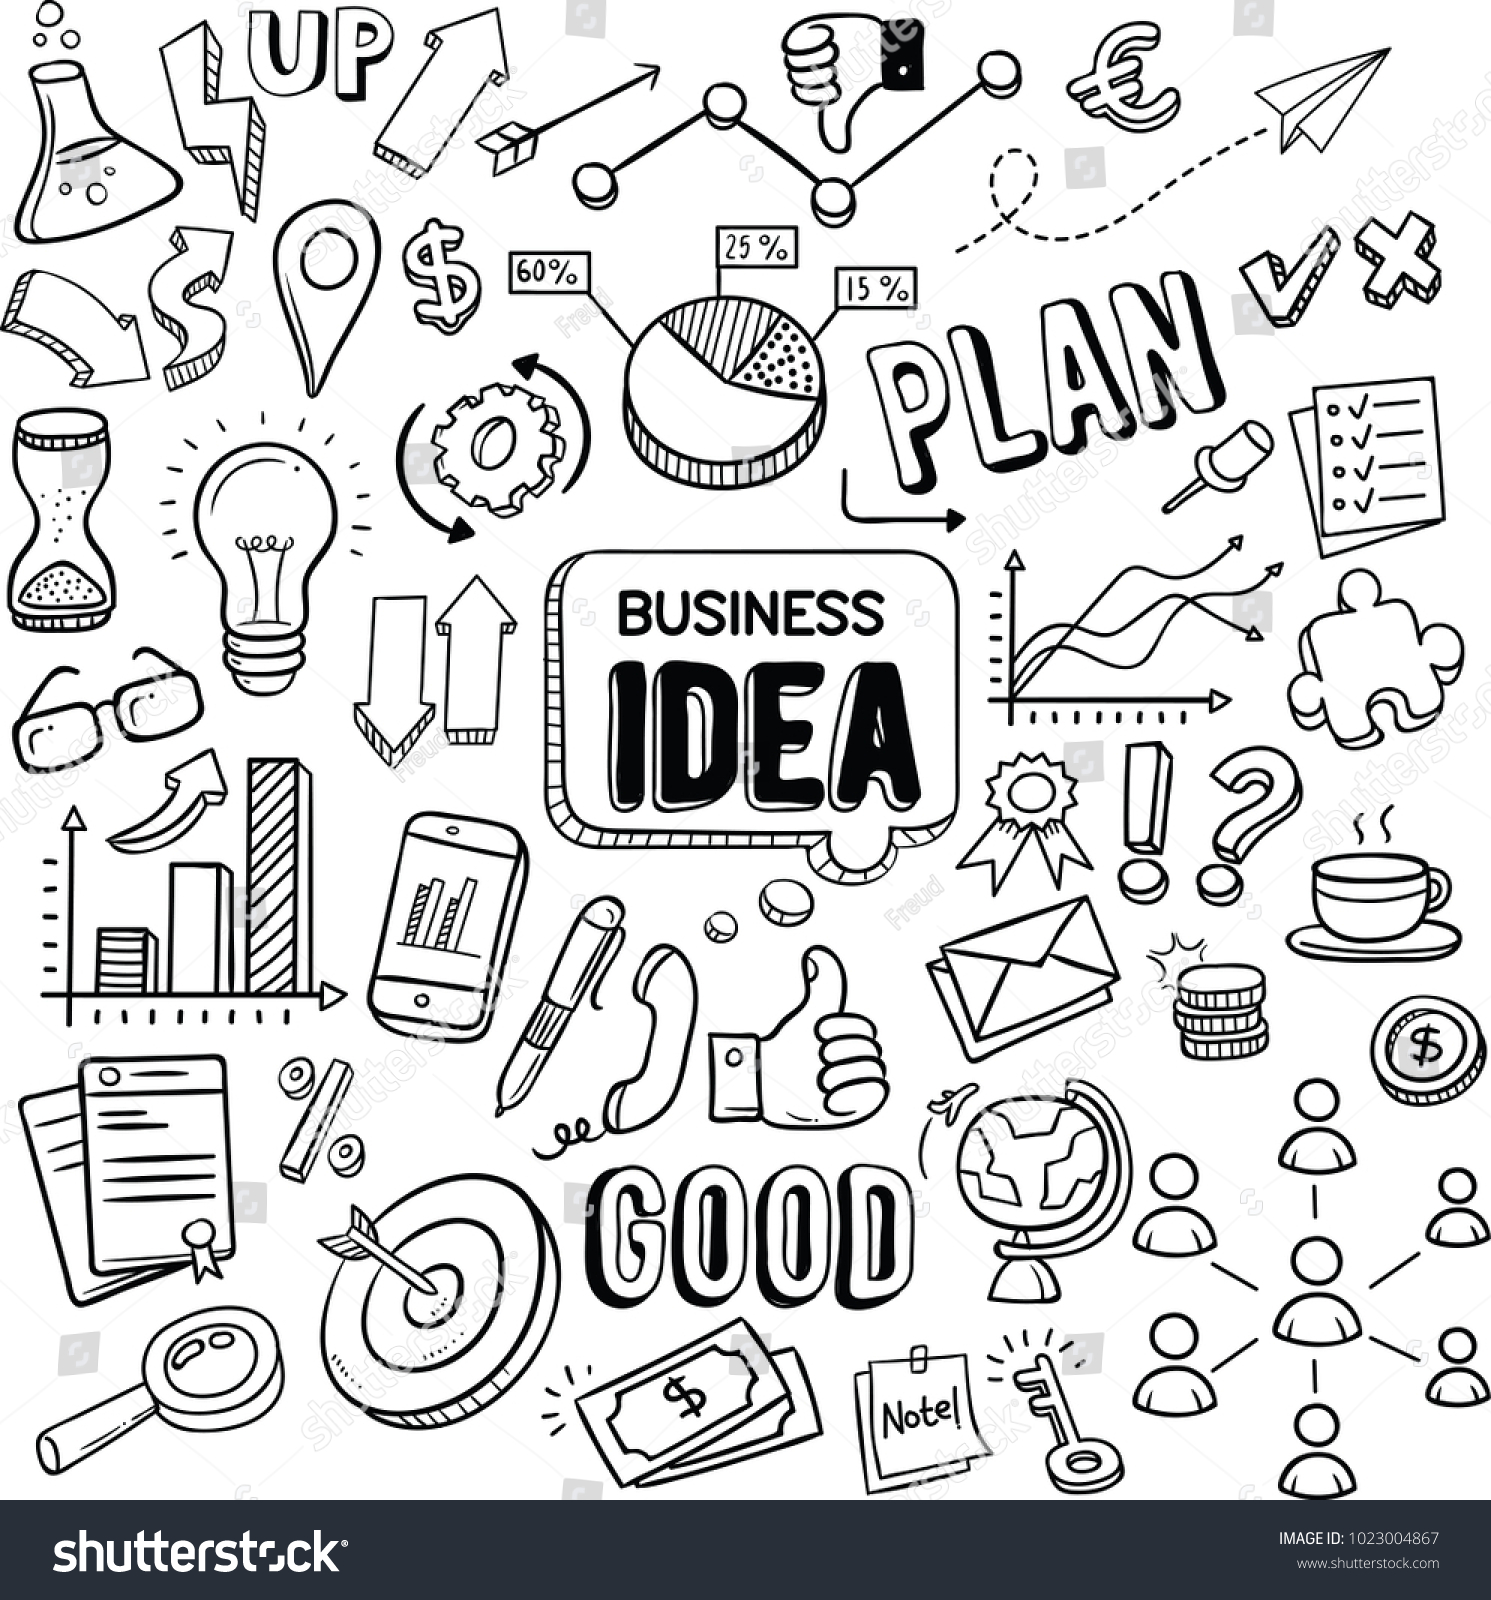 Business idea and business plan vector doodles #1023004867